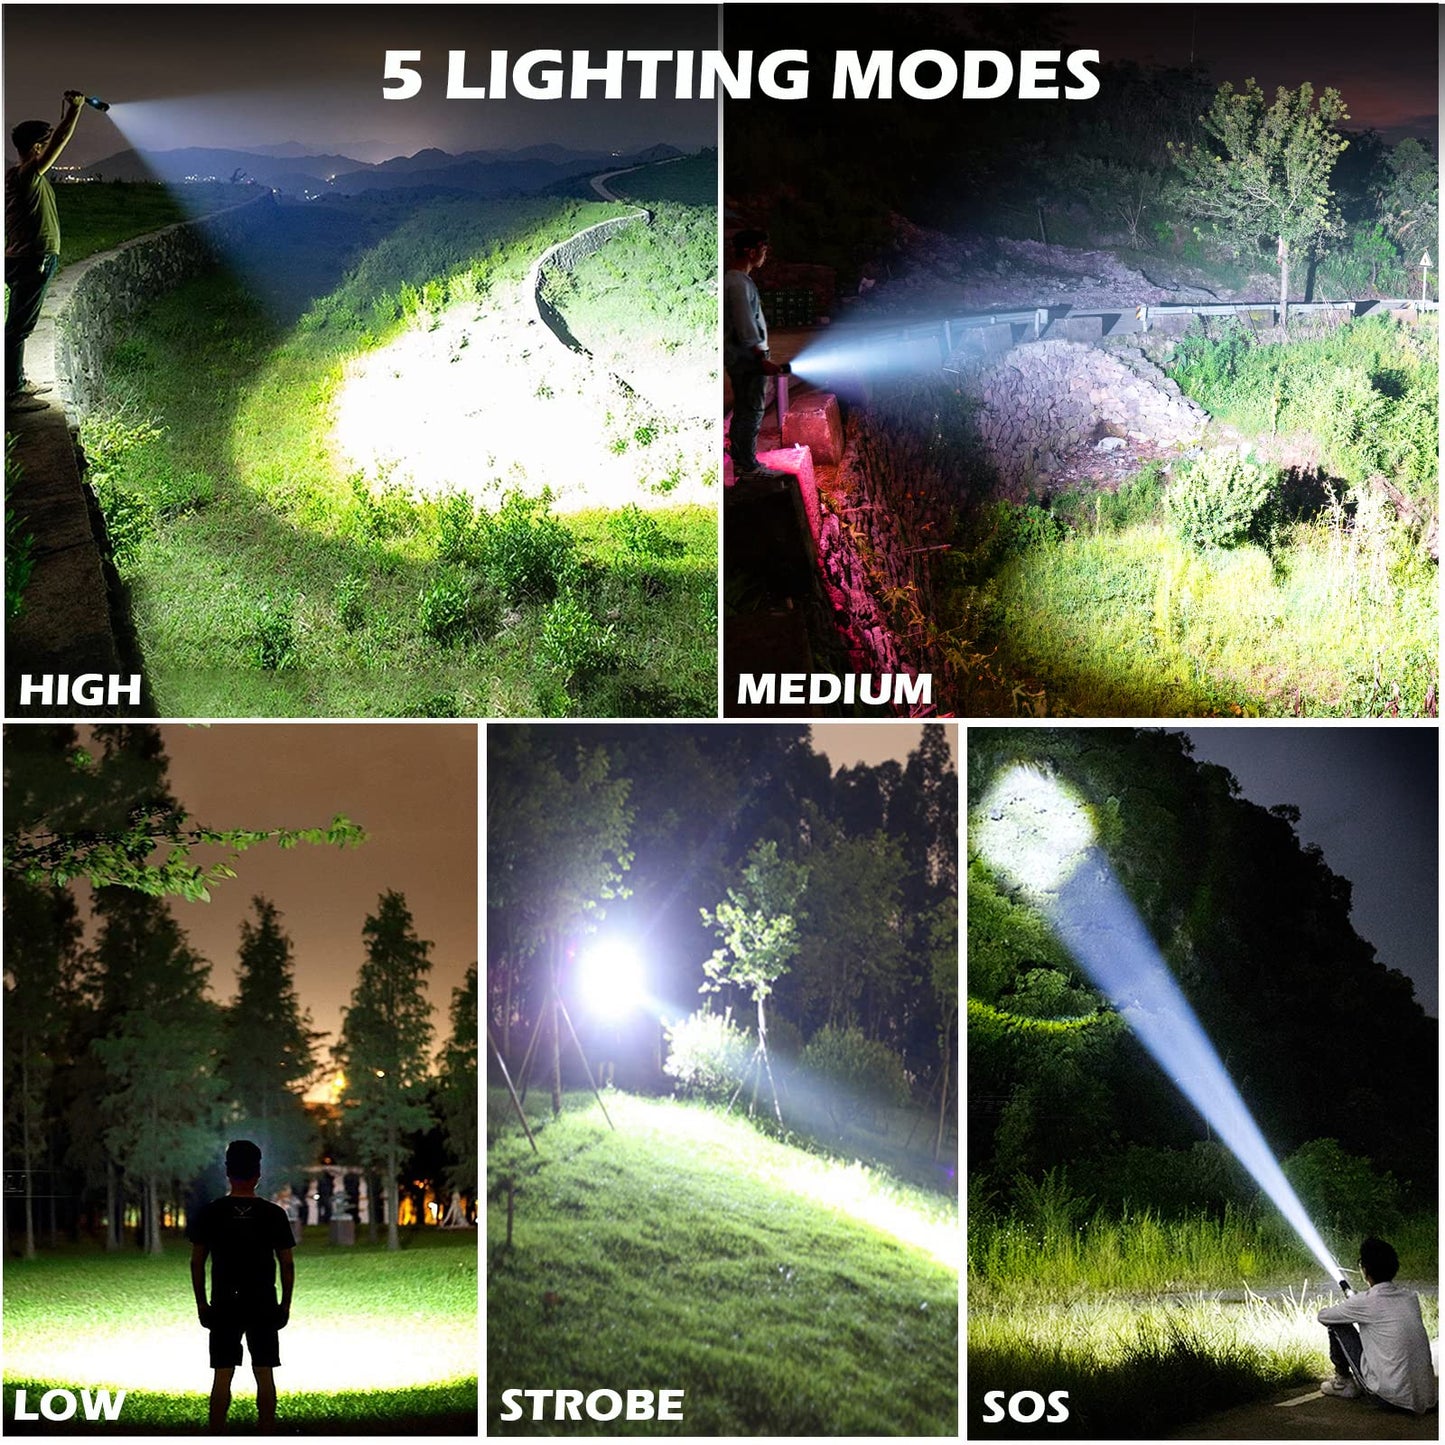 Rechargeable Flashlights 250,000 Lumens, Super Bright LED Flashlight High Lumens with USB Cable, 5 Modes Waterproof Flashlight Powerful Flash Light for Camping Hiking